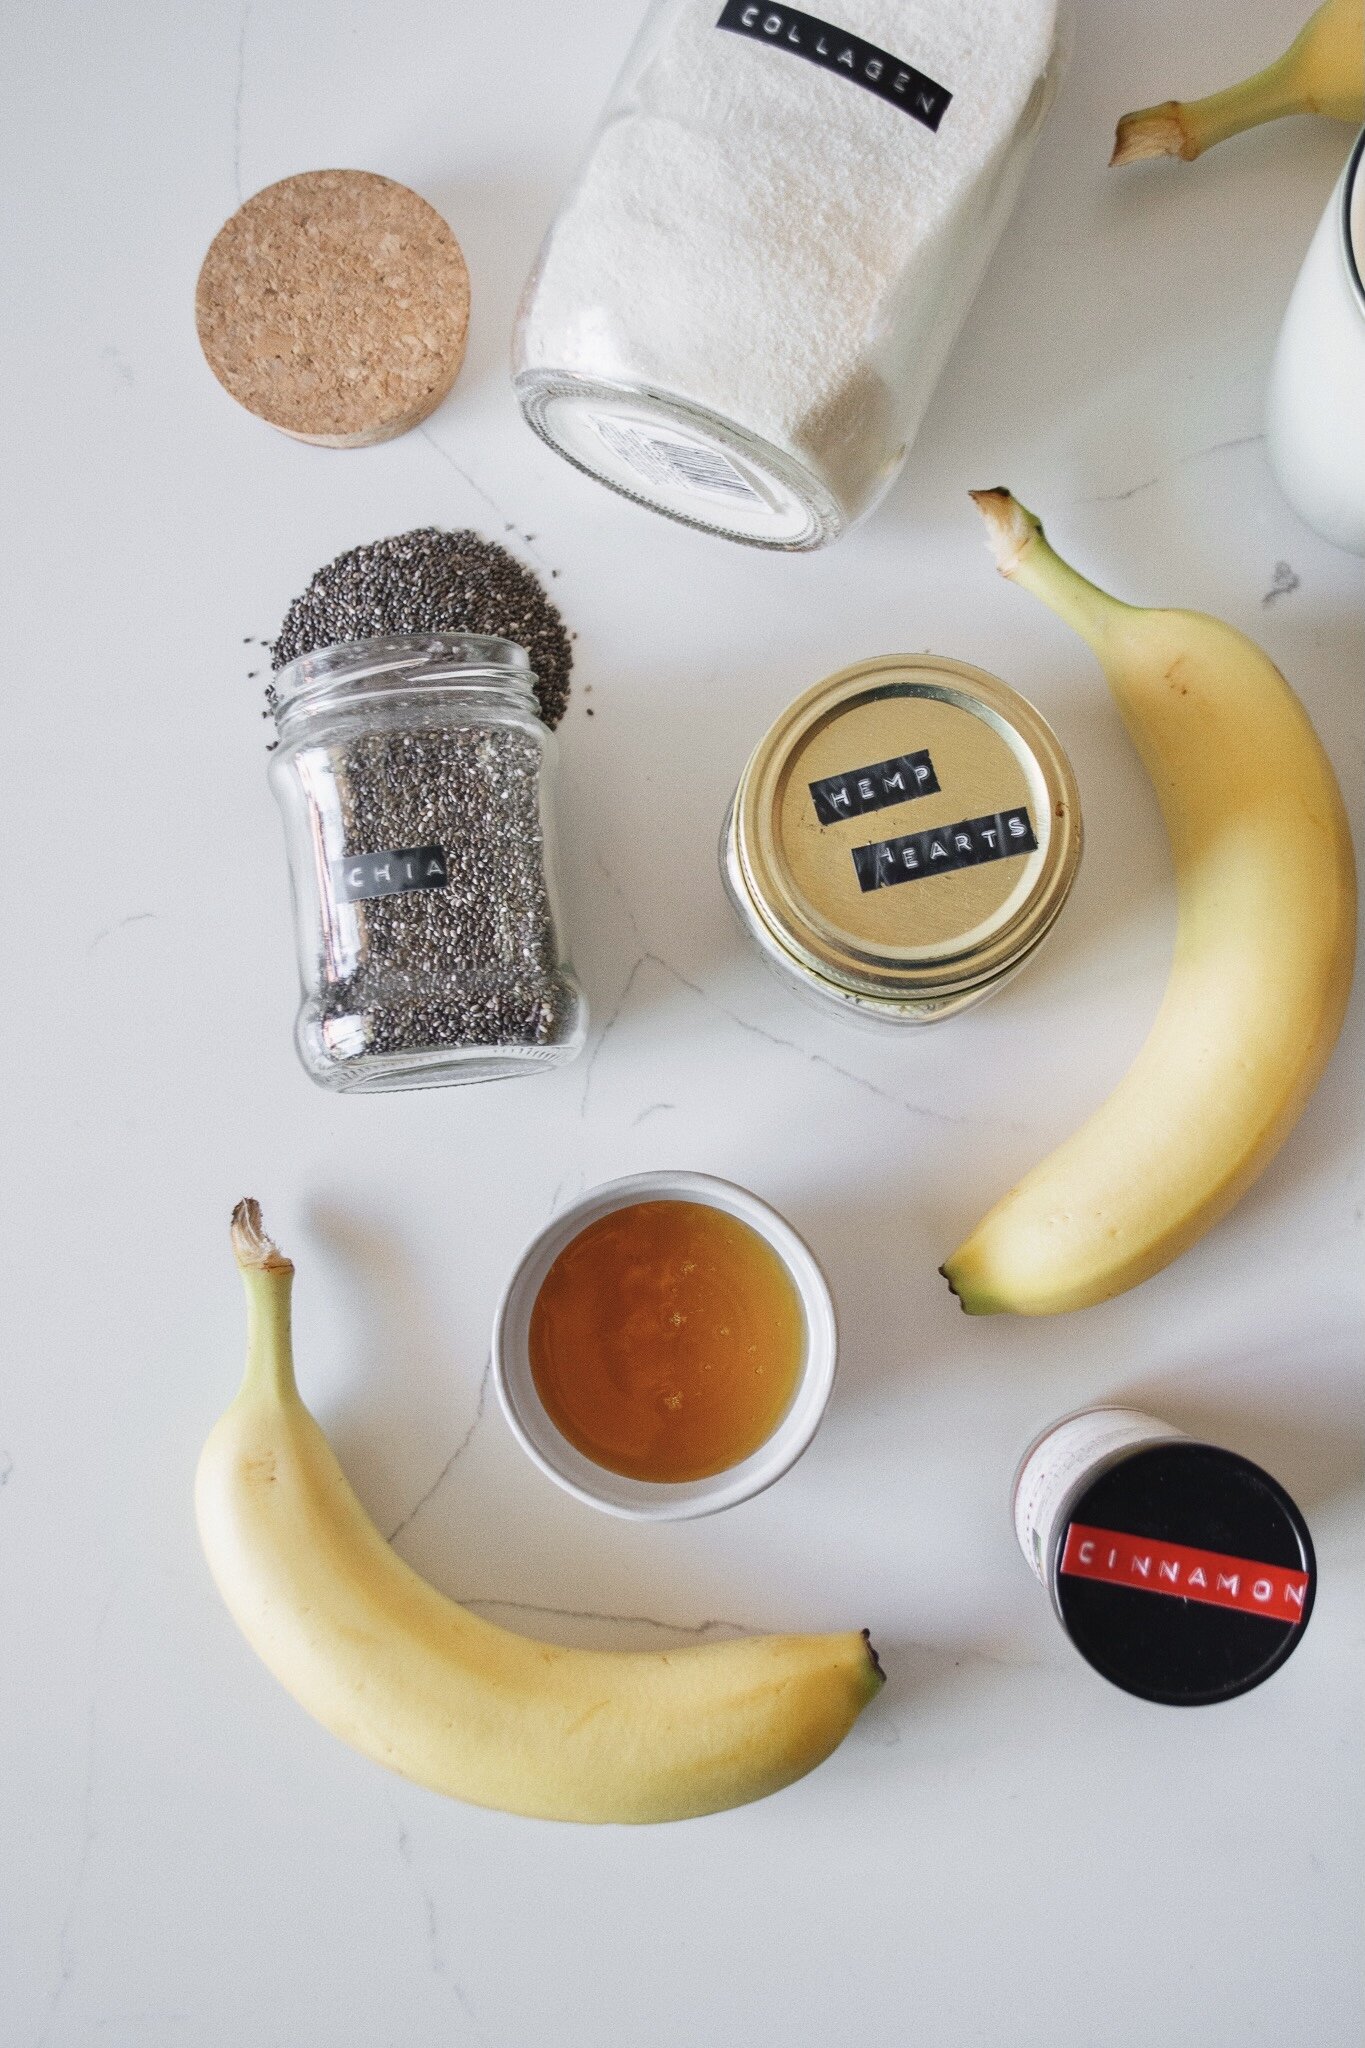 A few ingredients for Collagen Superfood Banana Smoothie